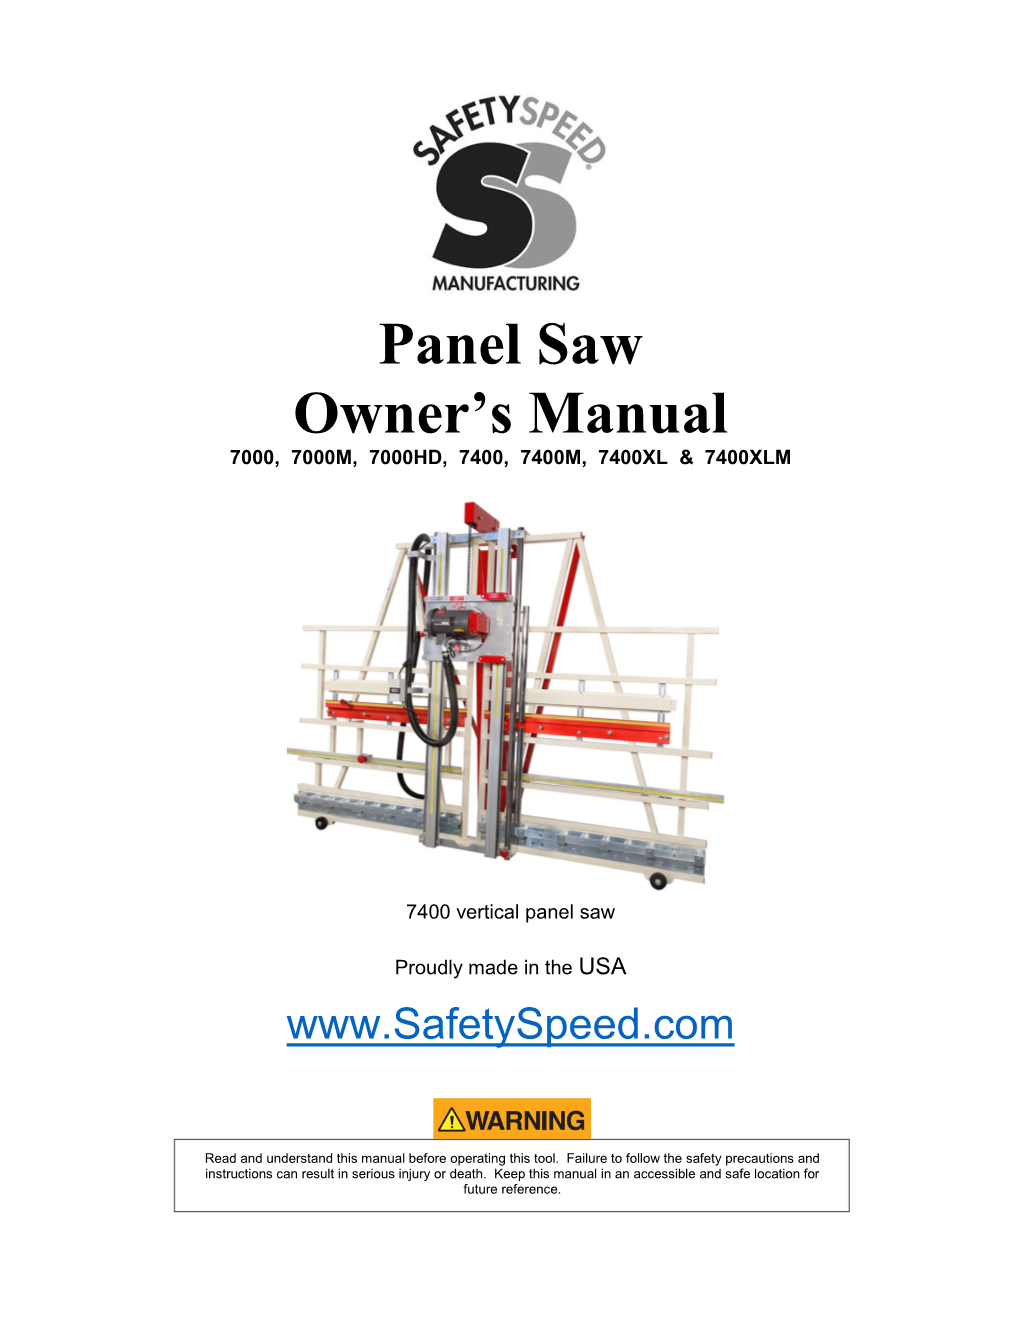 Download the 7000-7400 Owner's Manual